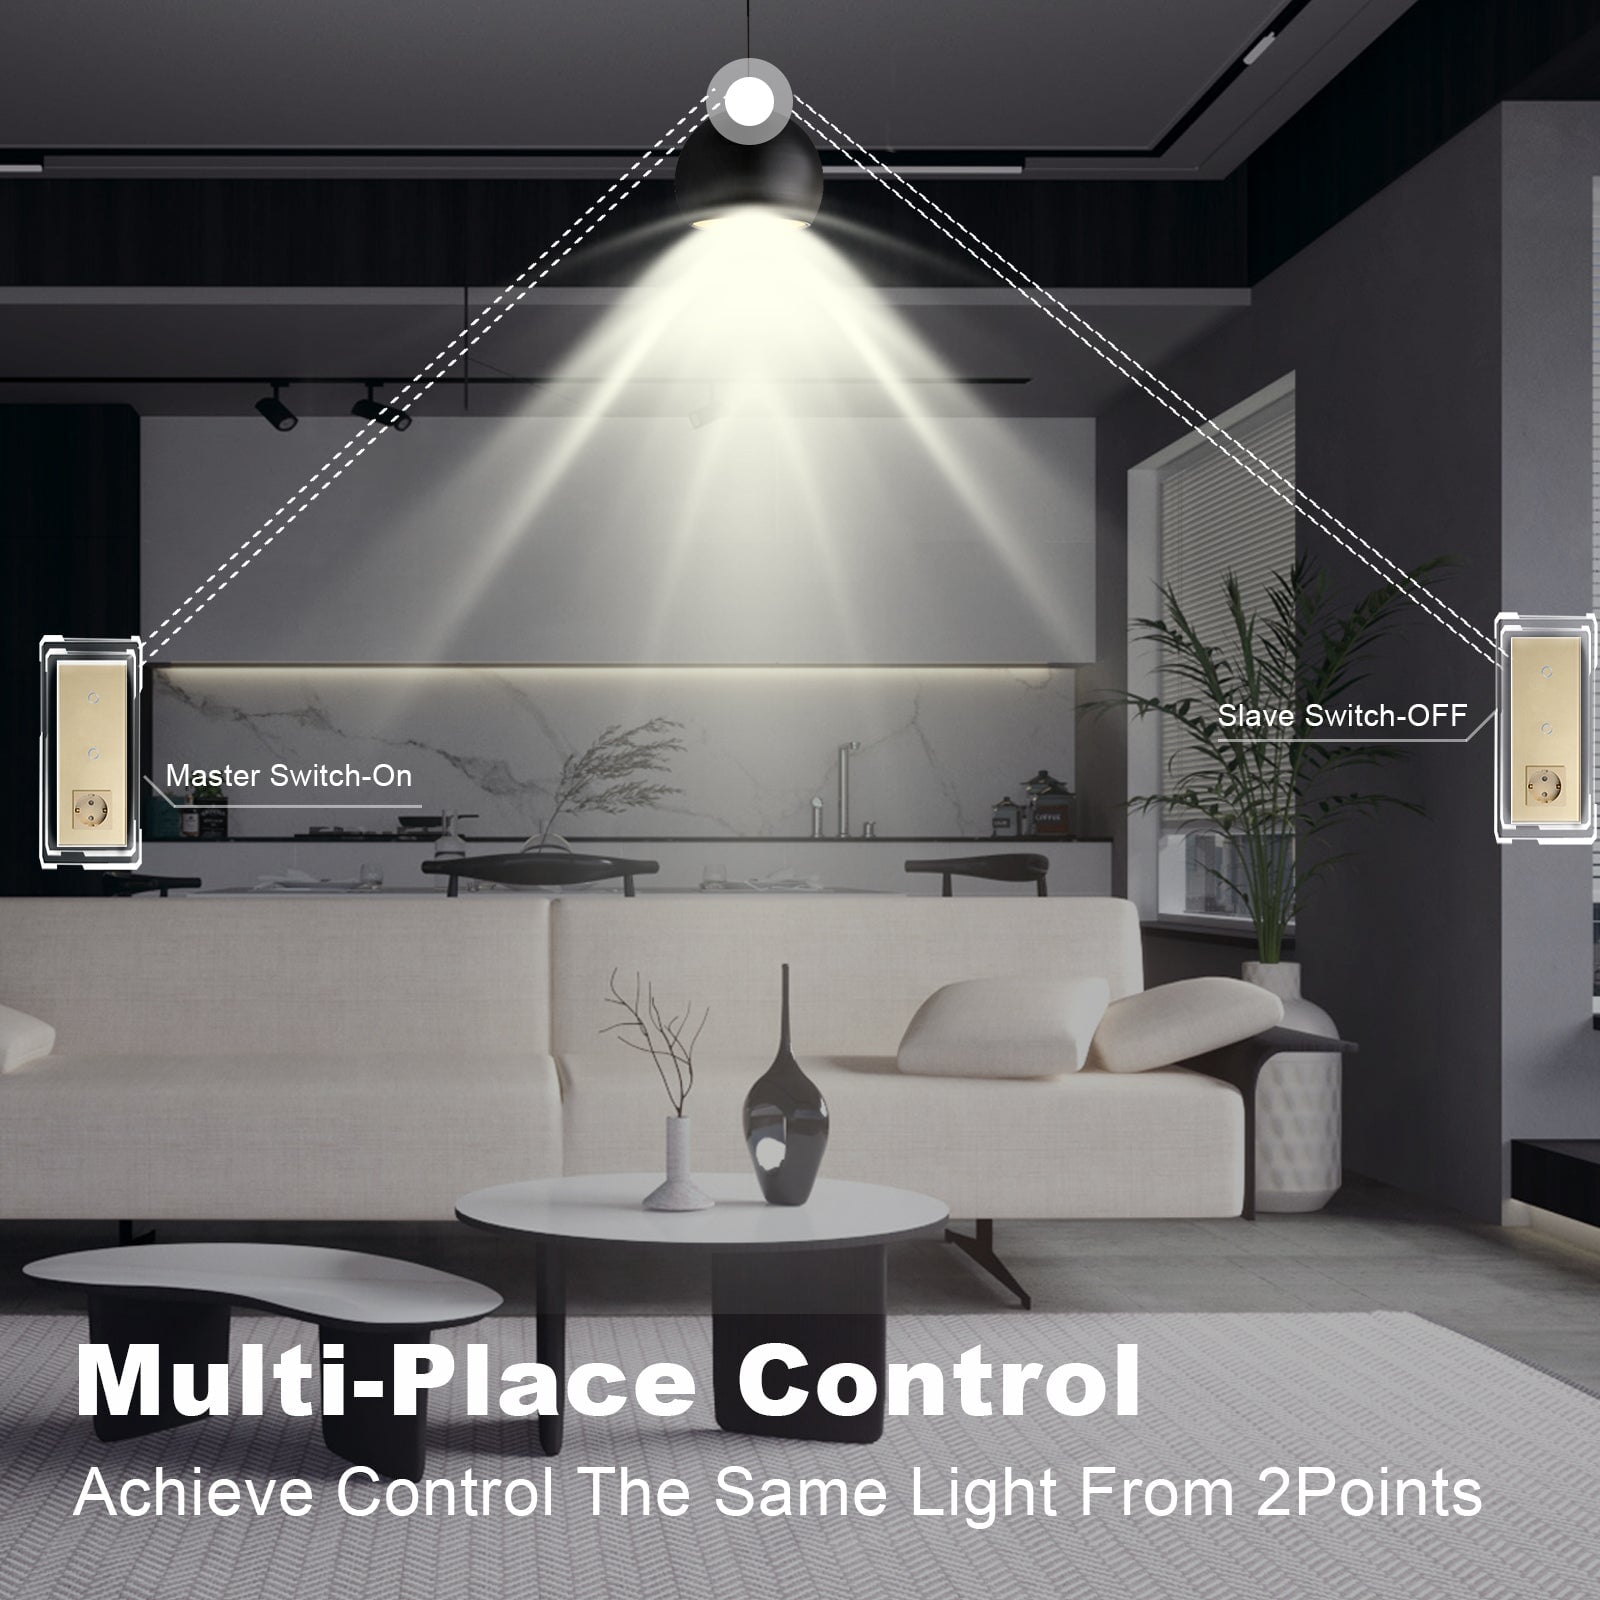 Bseed Smart WiFi Light Switches Multi Control With EU Normal Standard Wall Socket Light Switches Bseedswitch 